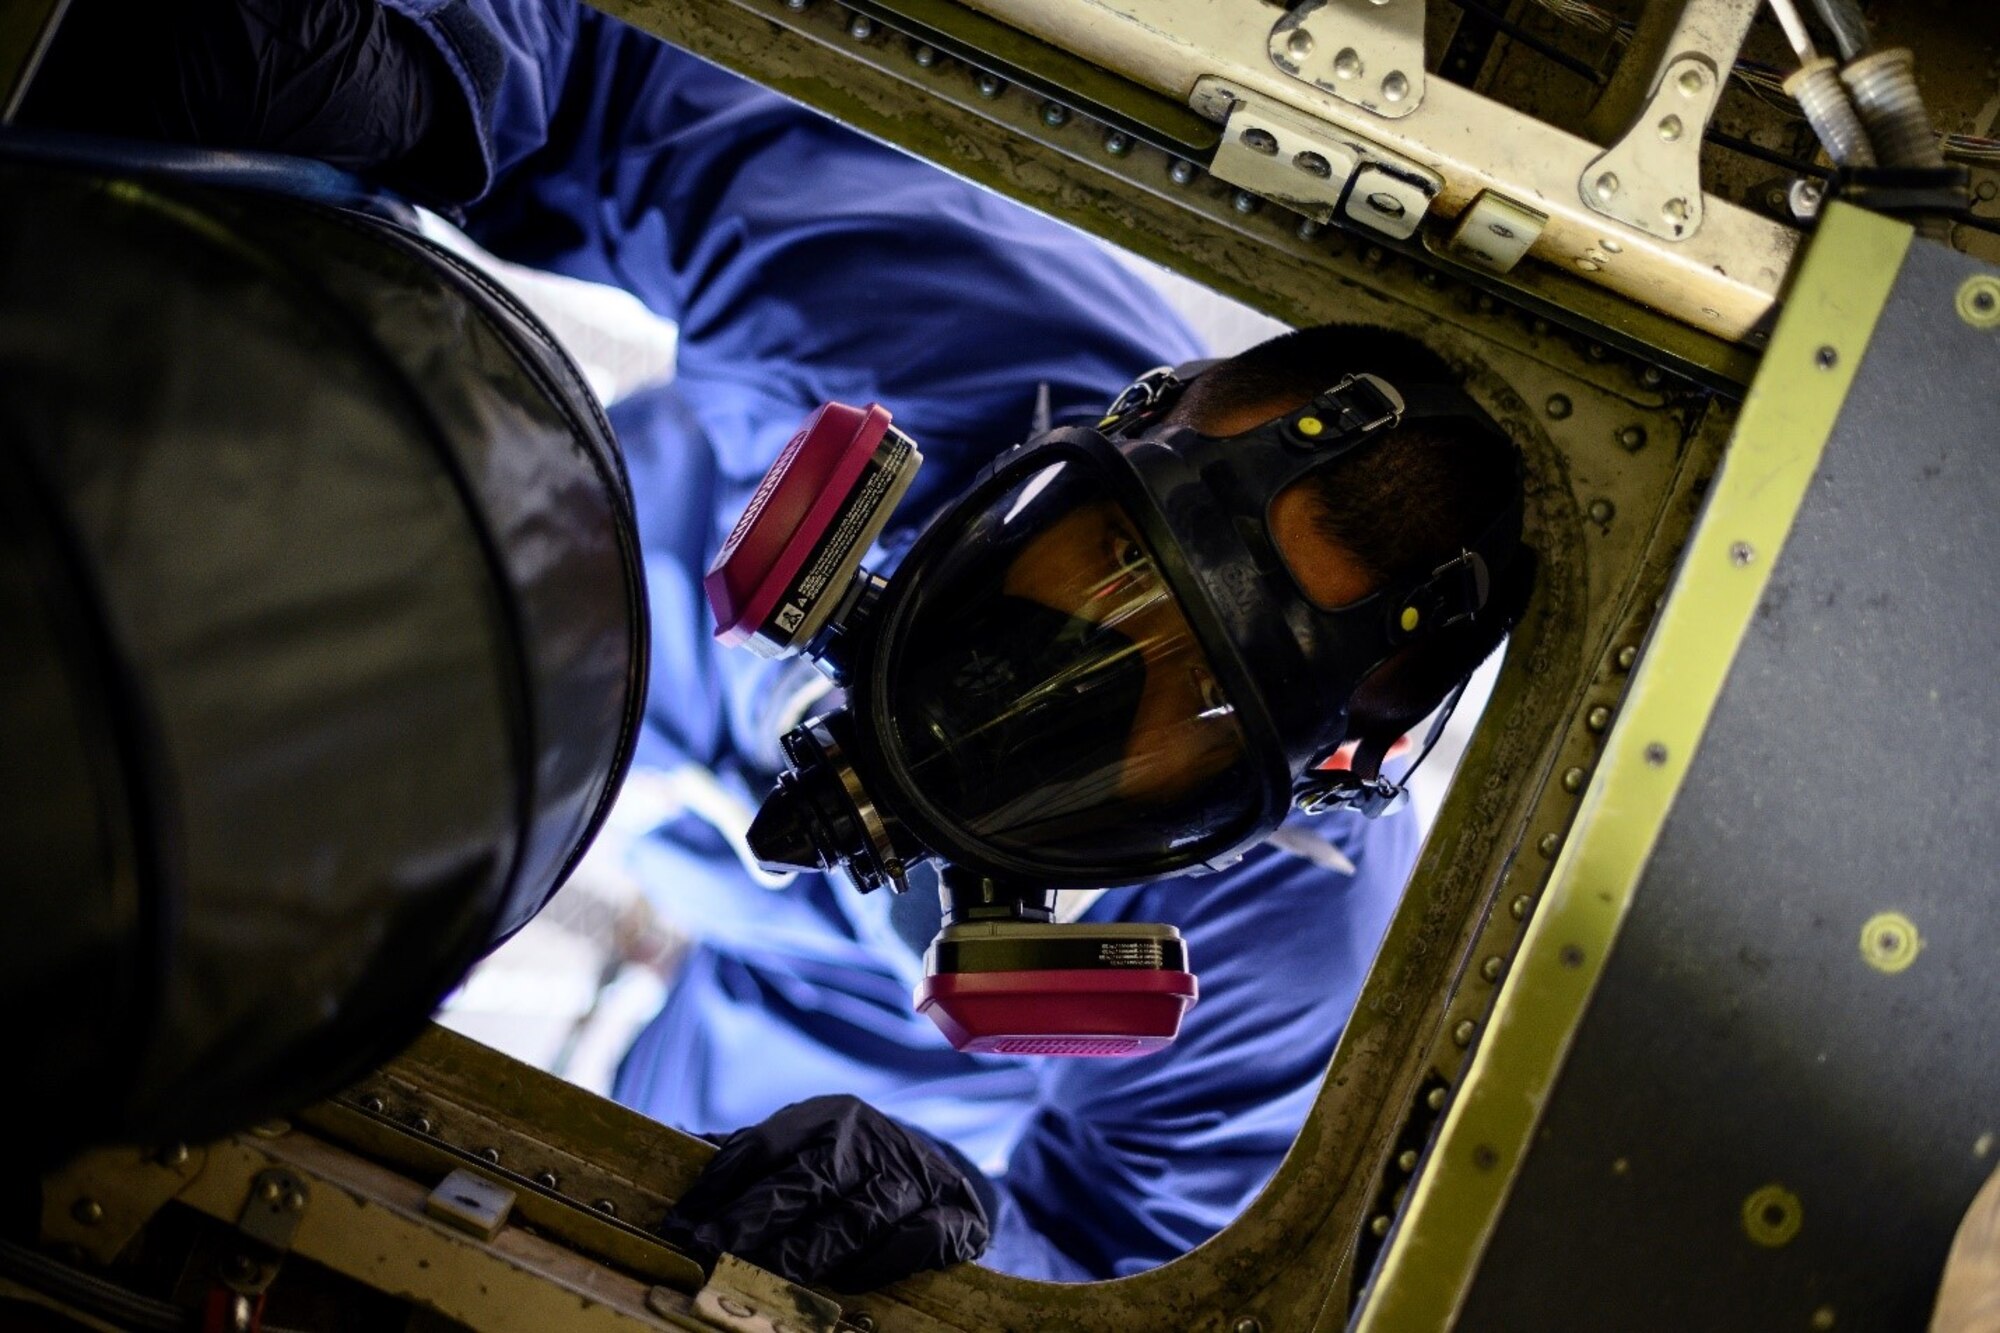 An Airman in a respirator looks up into a compartment of an aircraft.